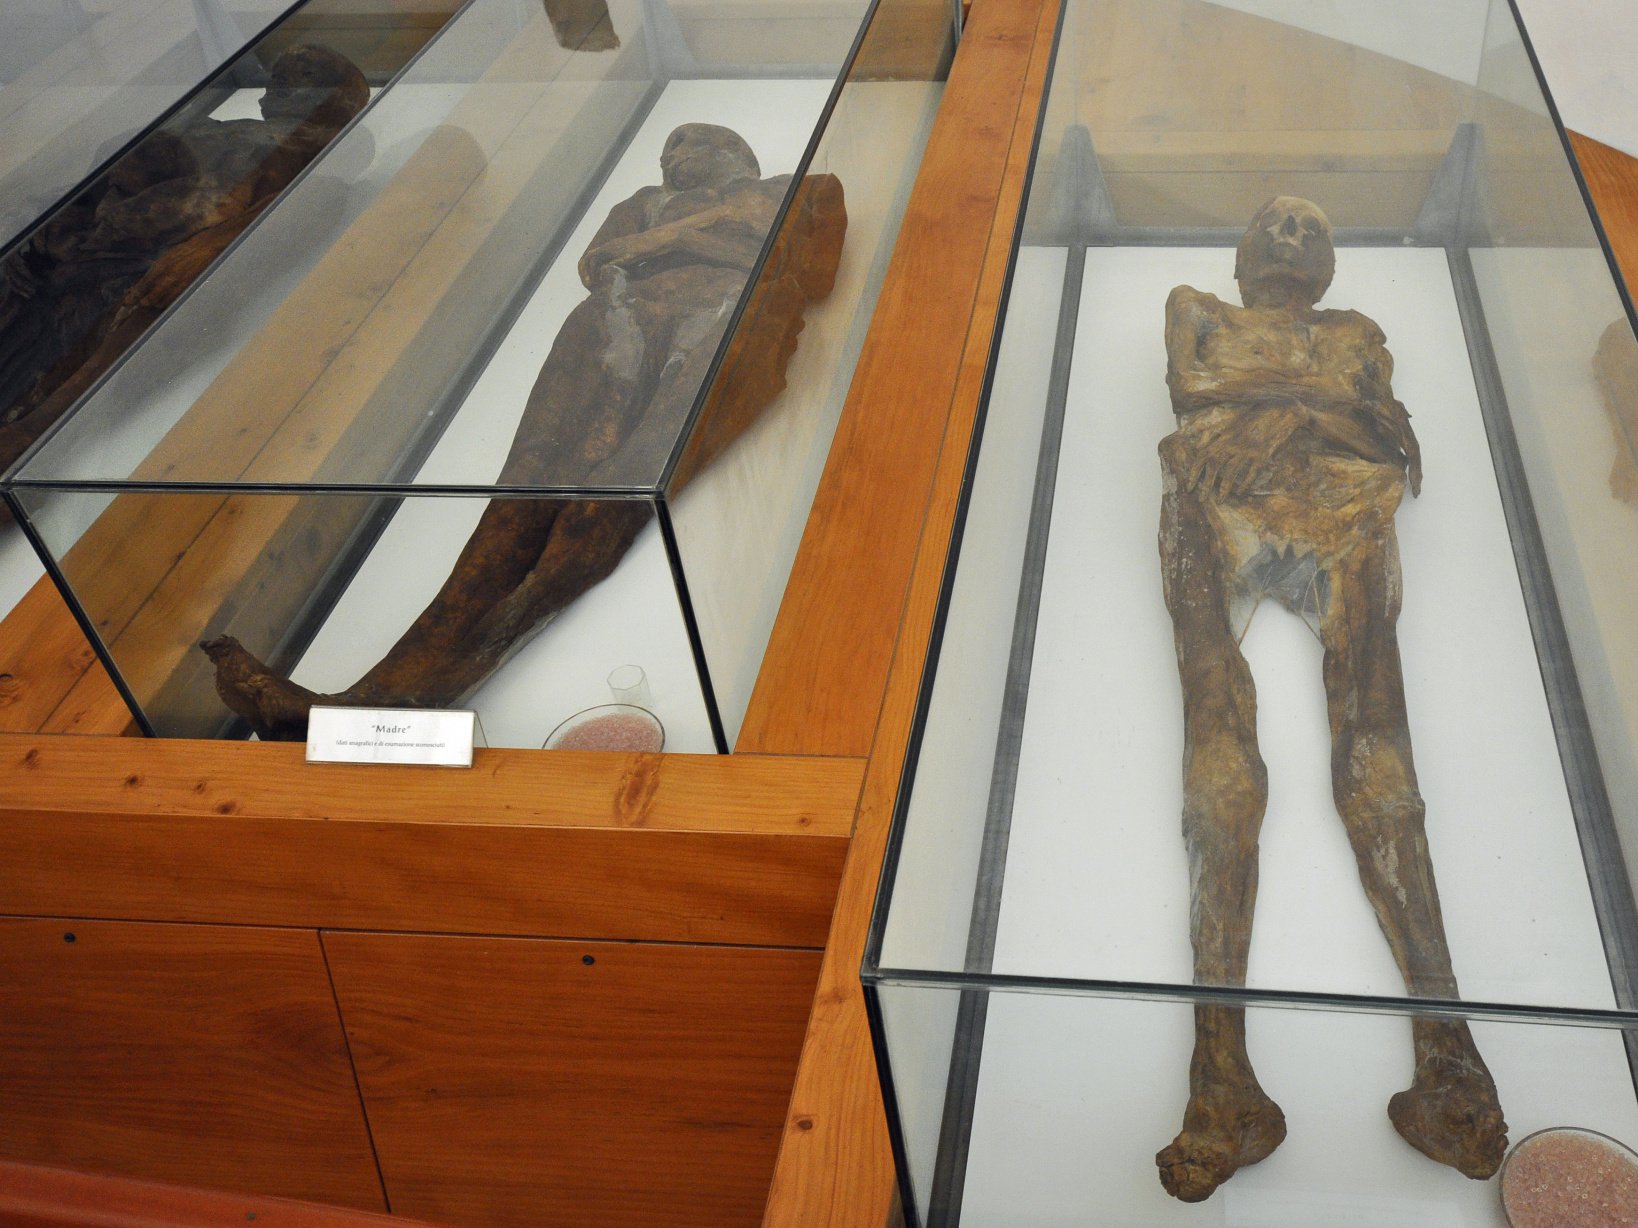 The Venzone mummies remain on display in the Cemetery Chapel of Saint Michael